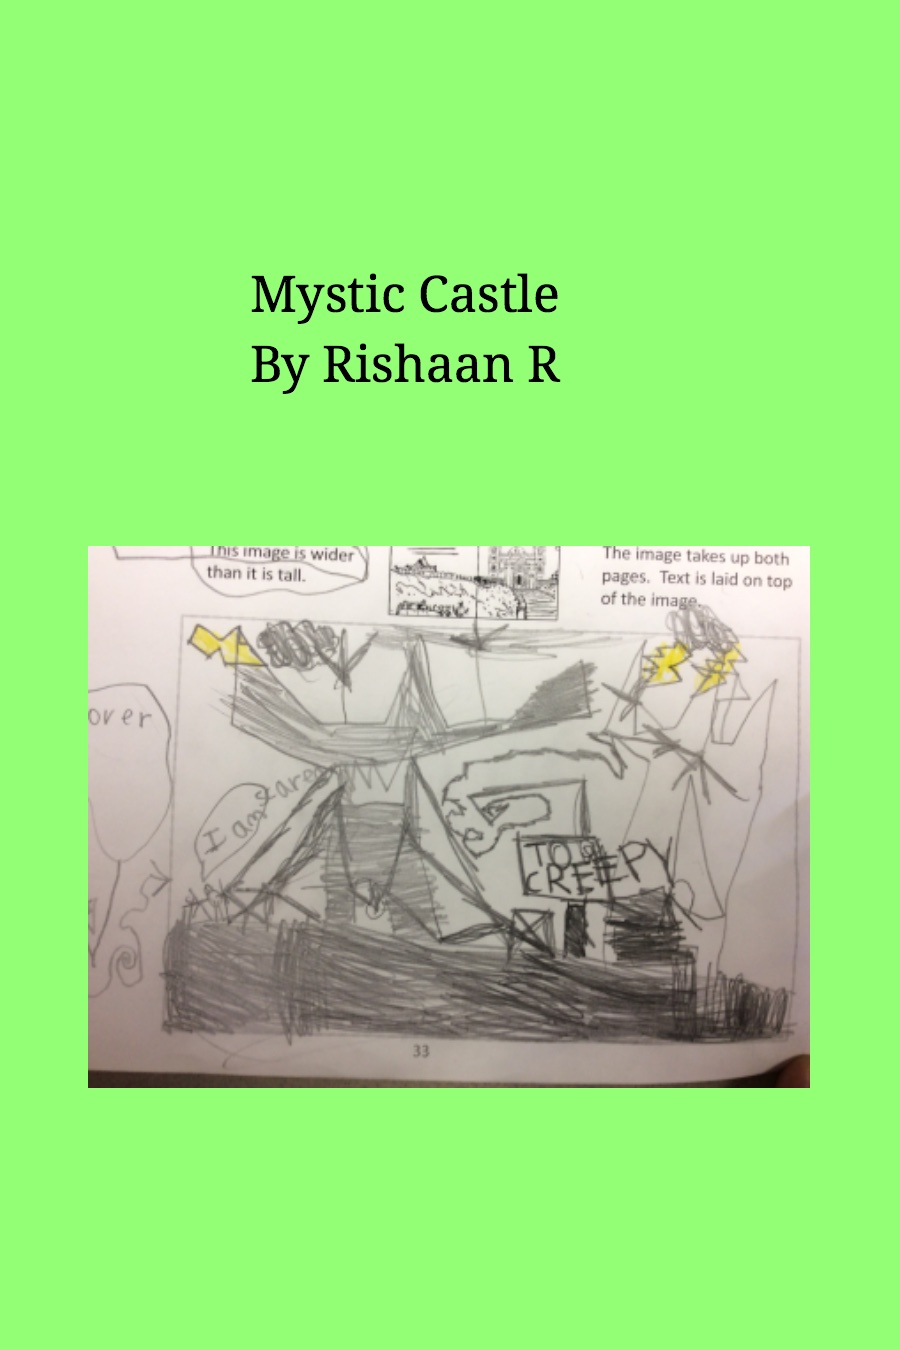 Mystic Castle by Rishaan R